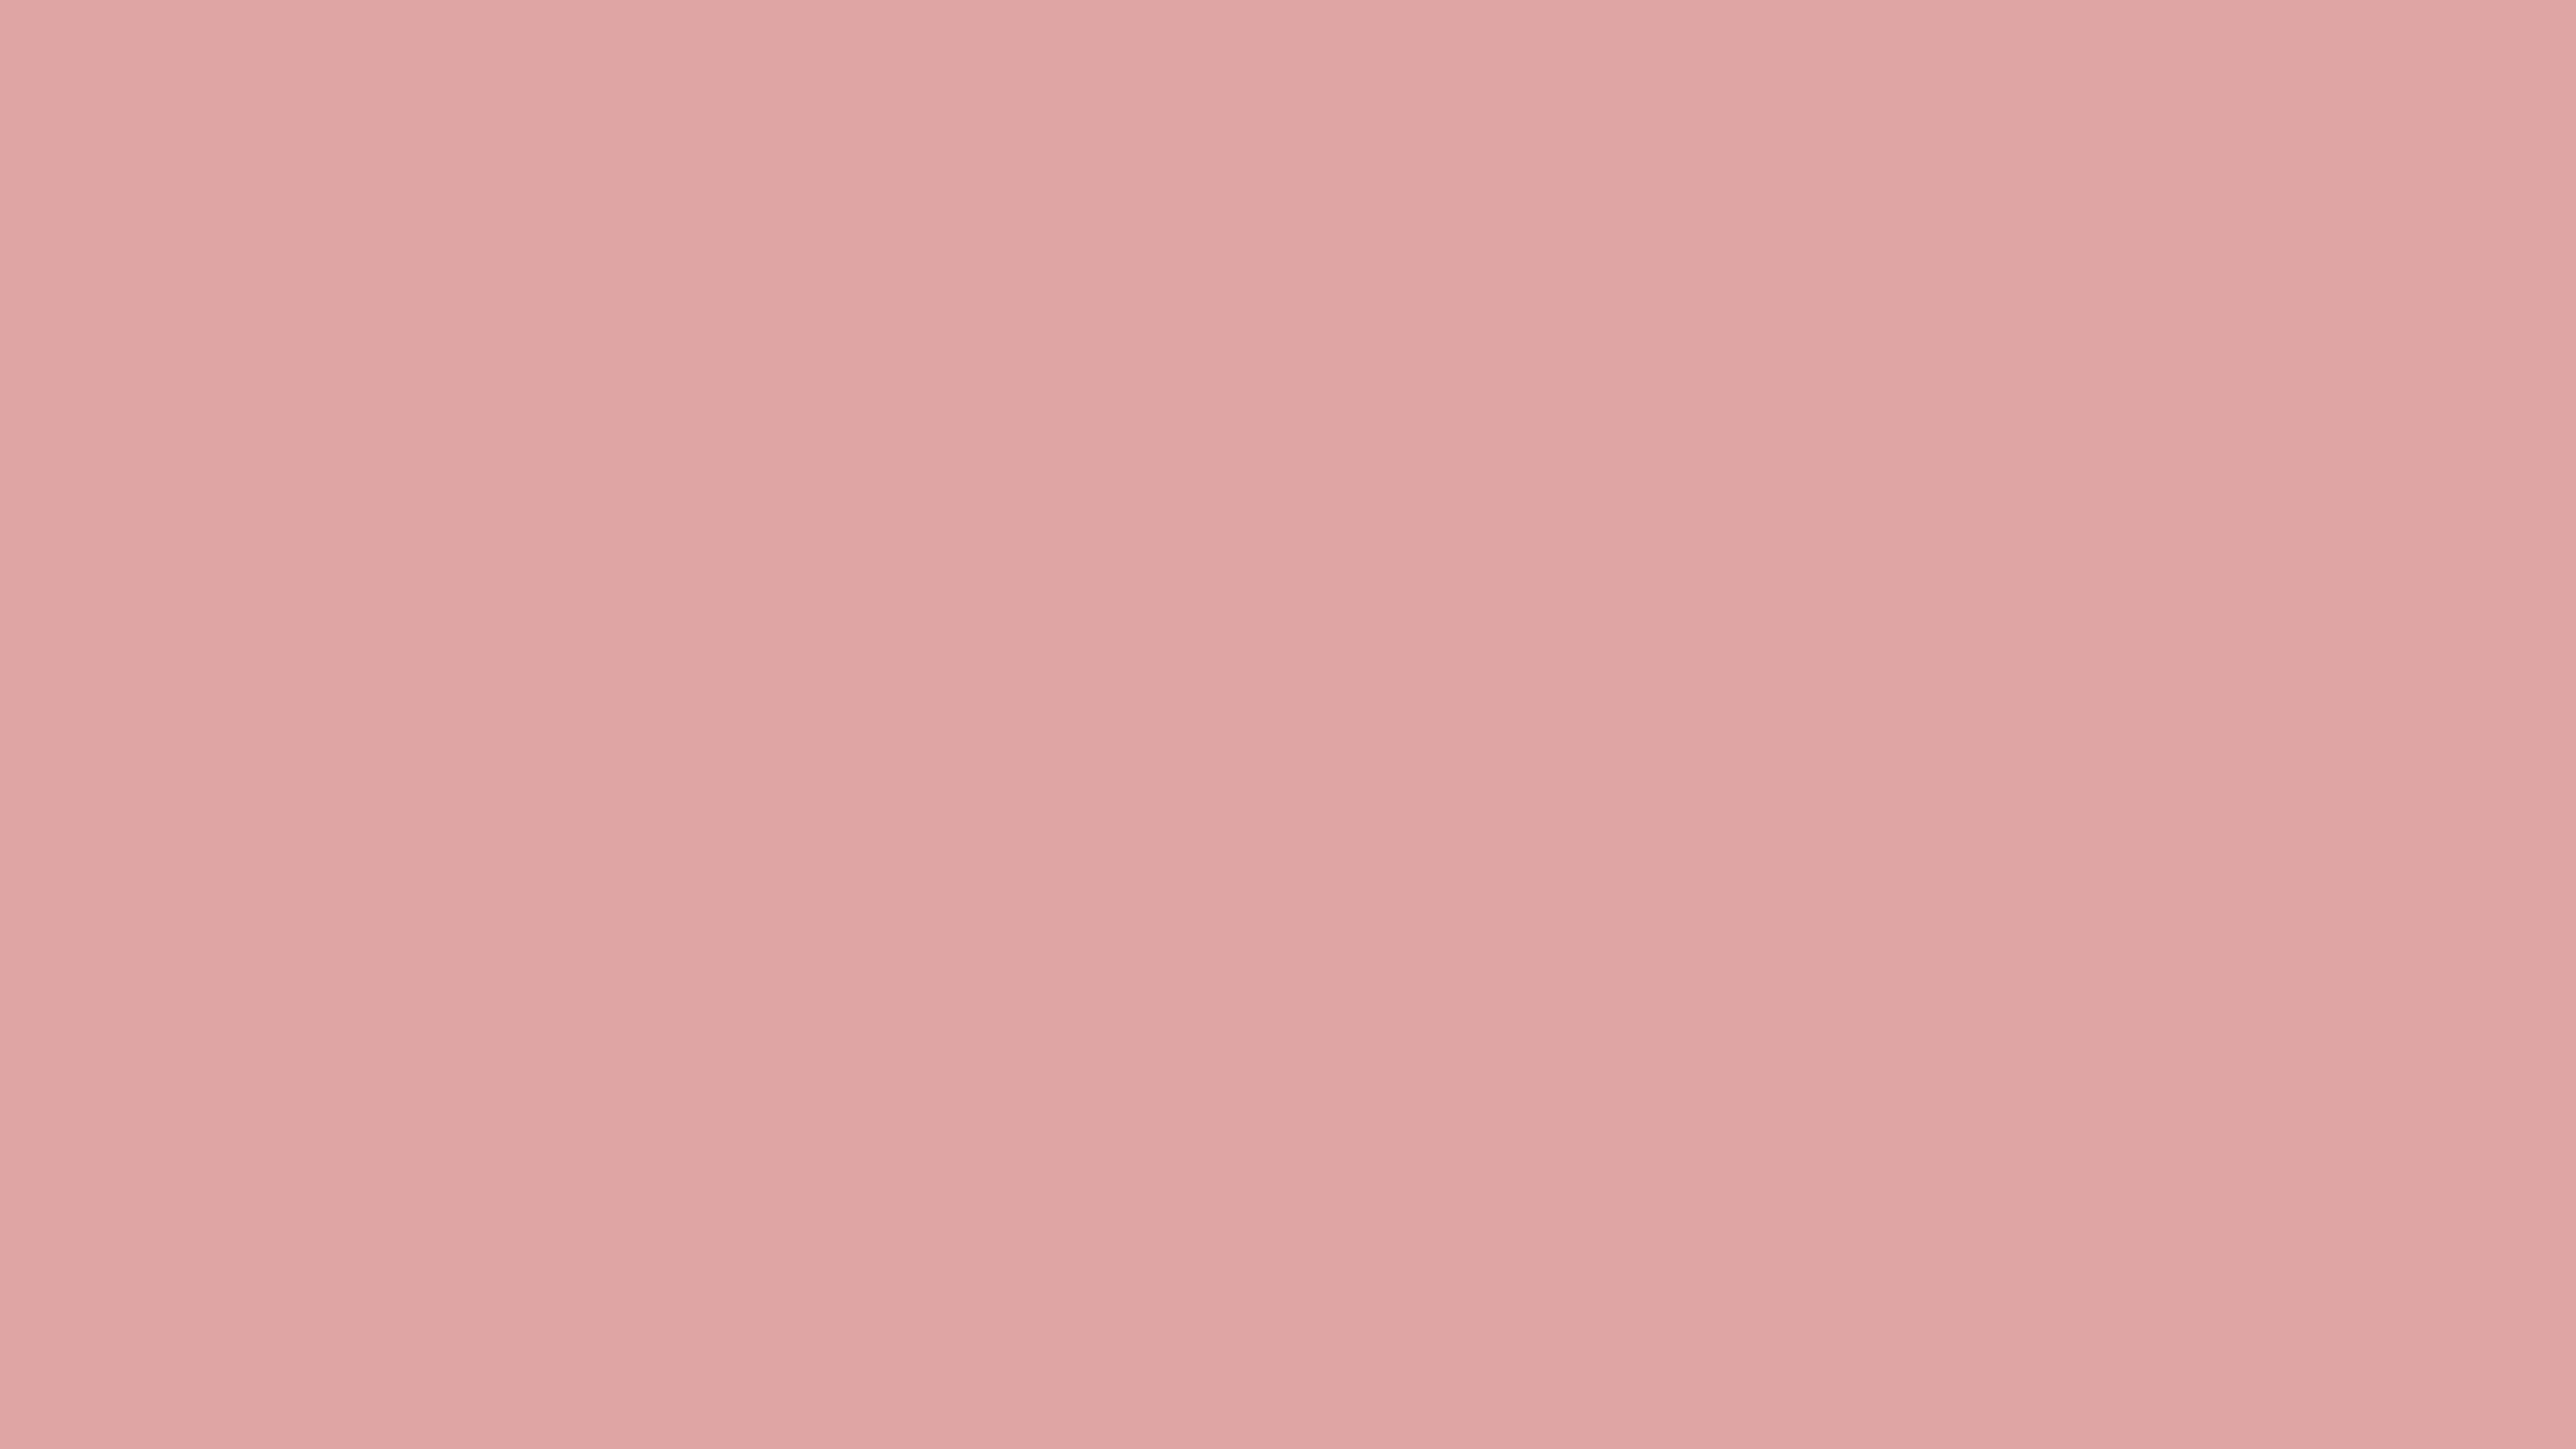 4096x2304 Pastel Pink Solid Color Background